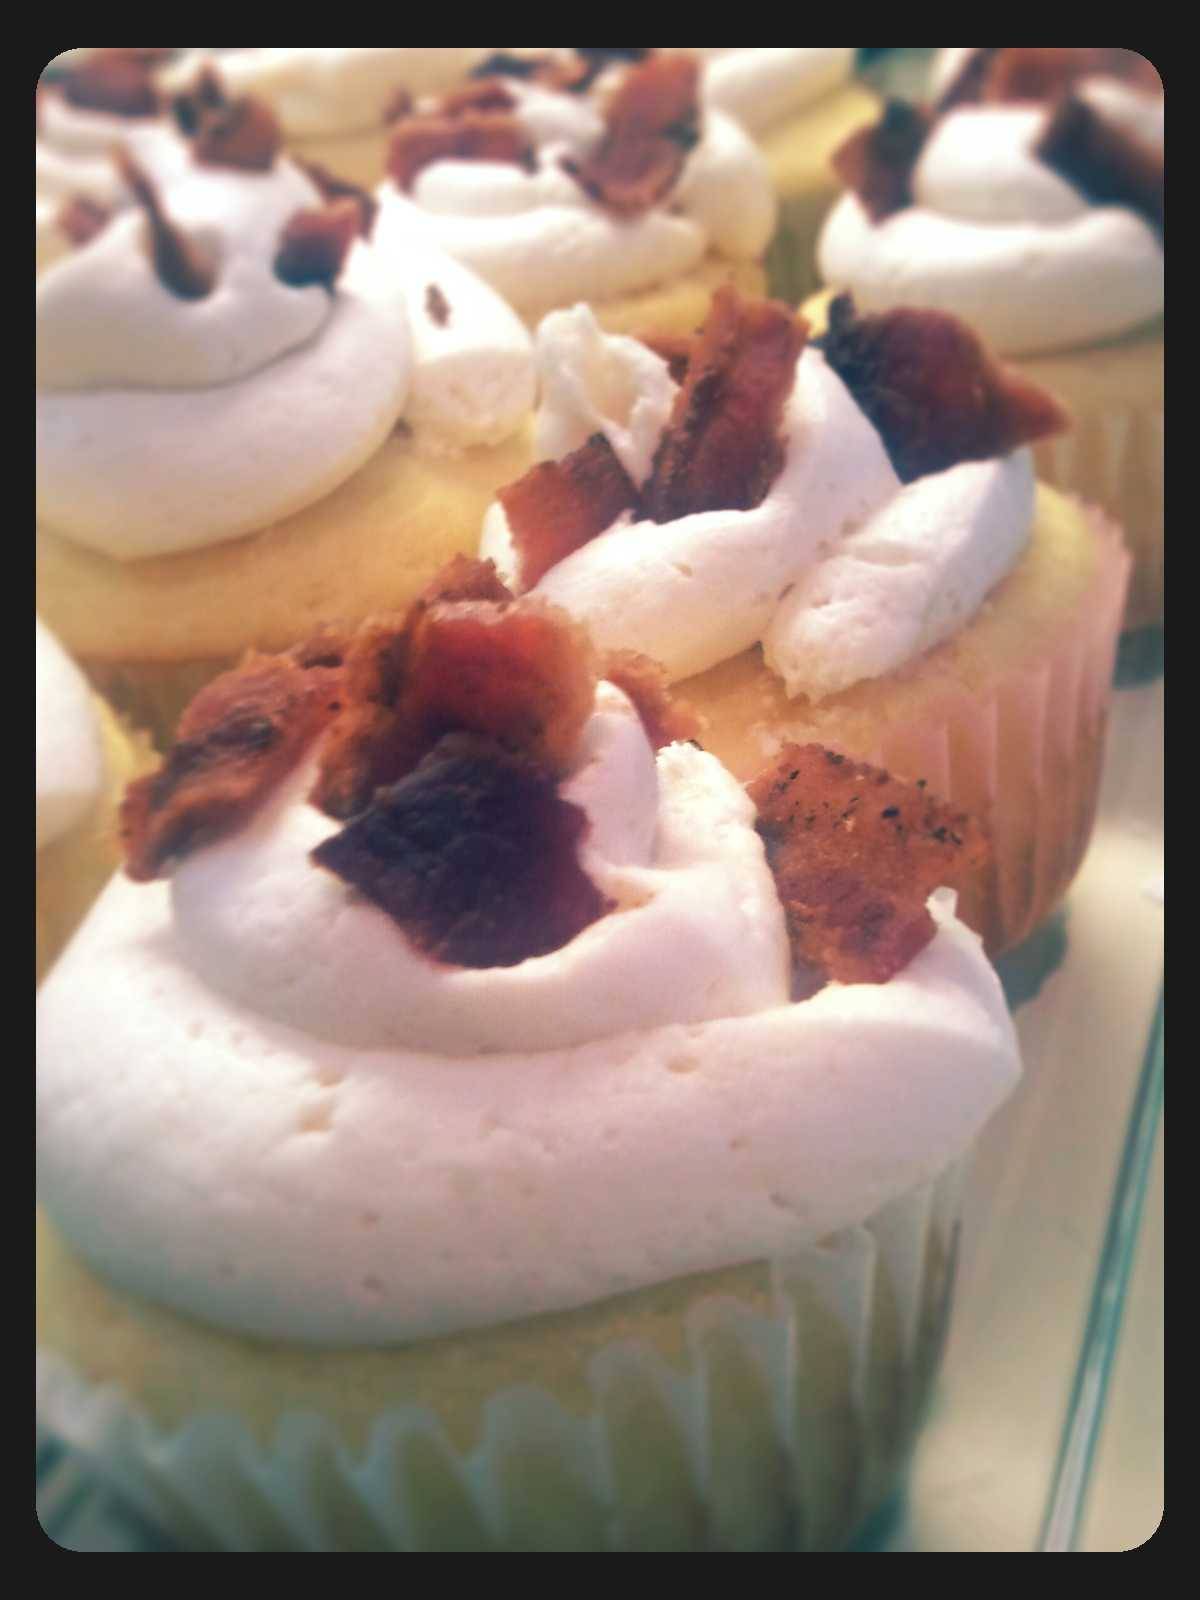 Pancake and Bacon Cupcakes with Maple Frosting